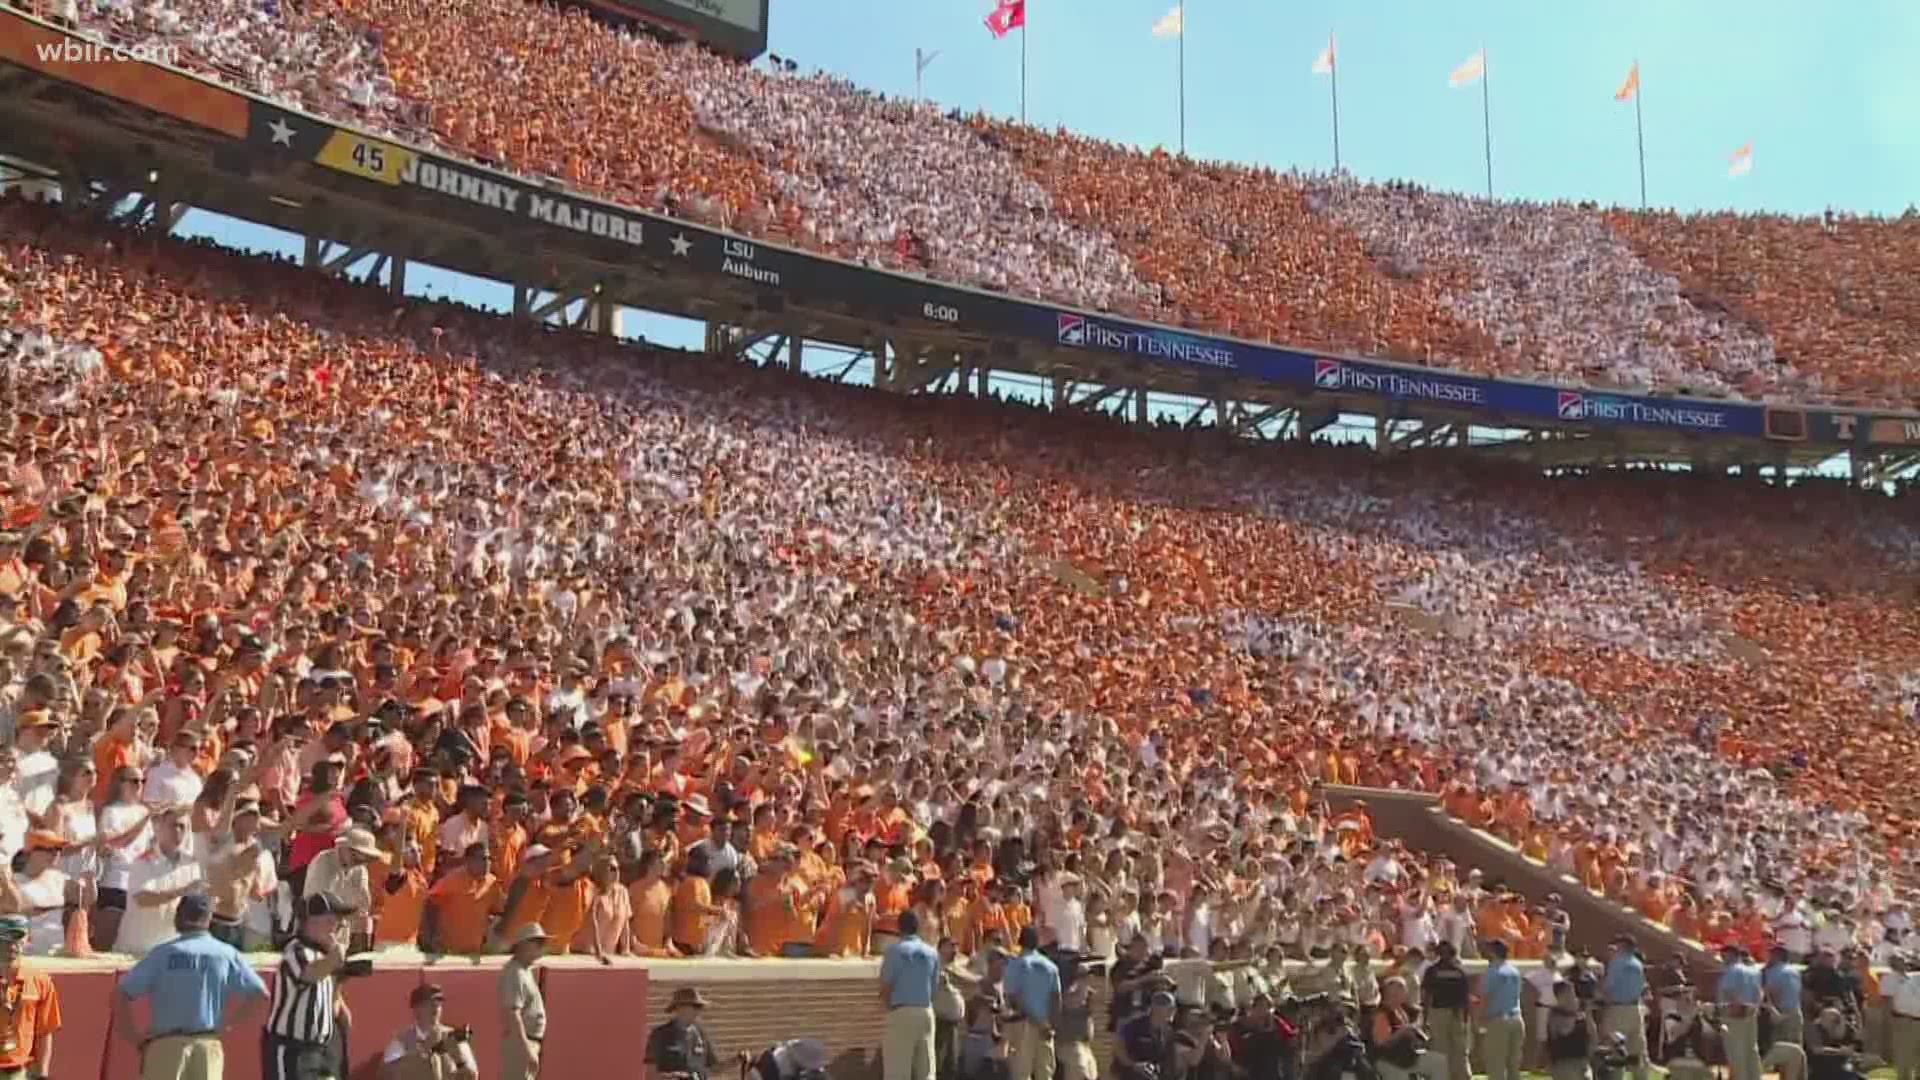 A 2016 report showed that, on average, Vol fans brought in $42 million in tax revenue for Knox County. Now, that may change with a shorter season.